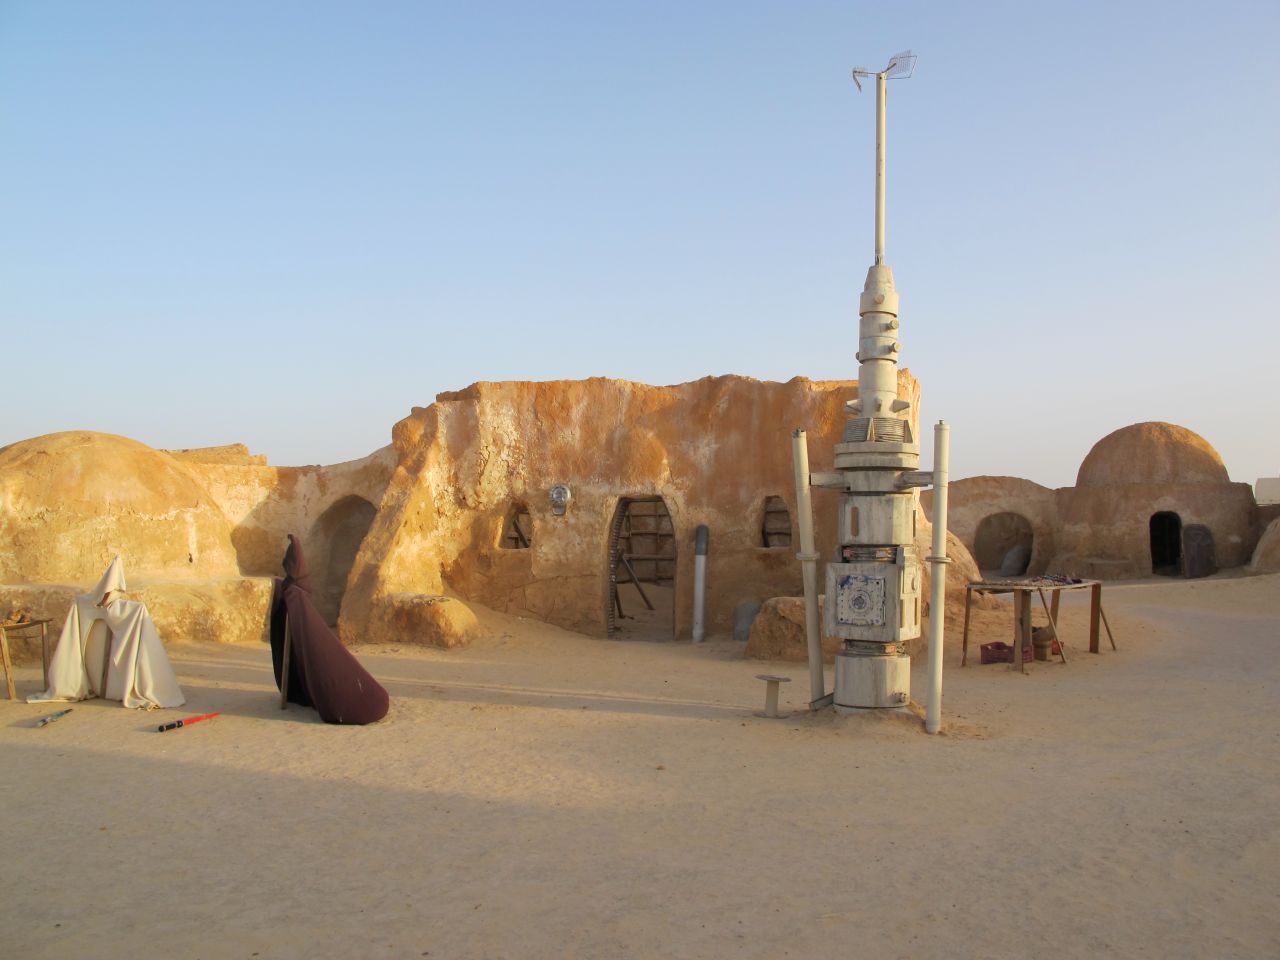 It is a pilgrimage destination for Star Wars fans from around the world, with Jedi Knight capes and lightsabers on display.